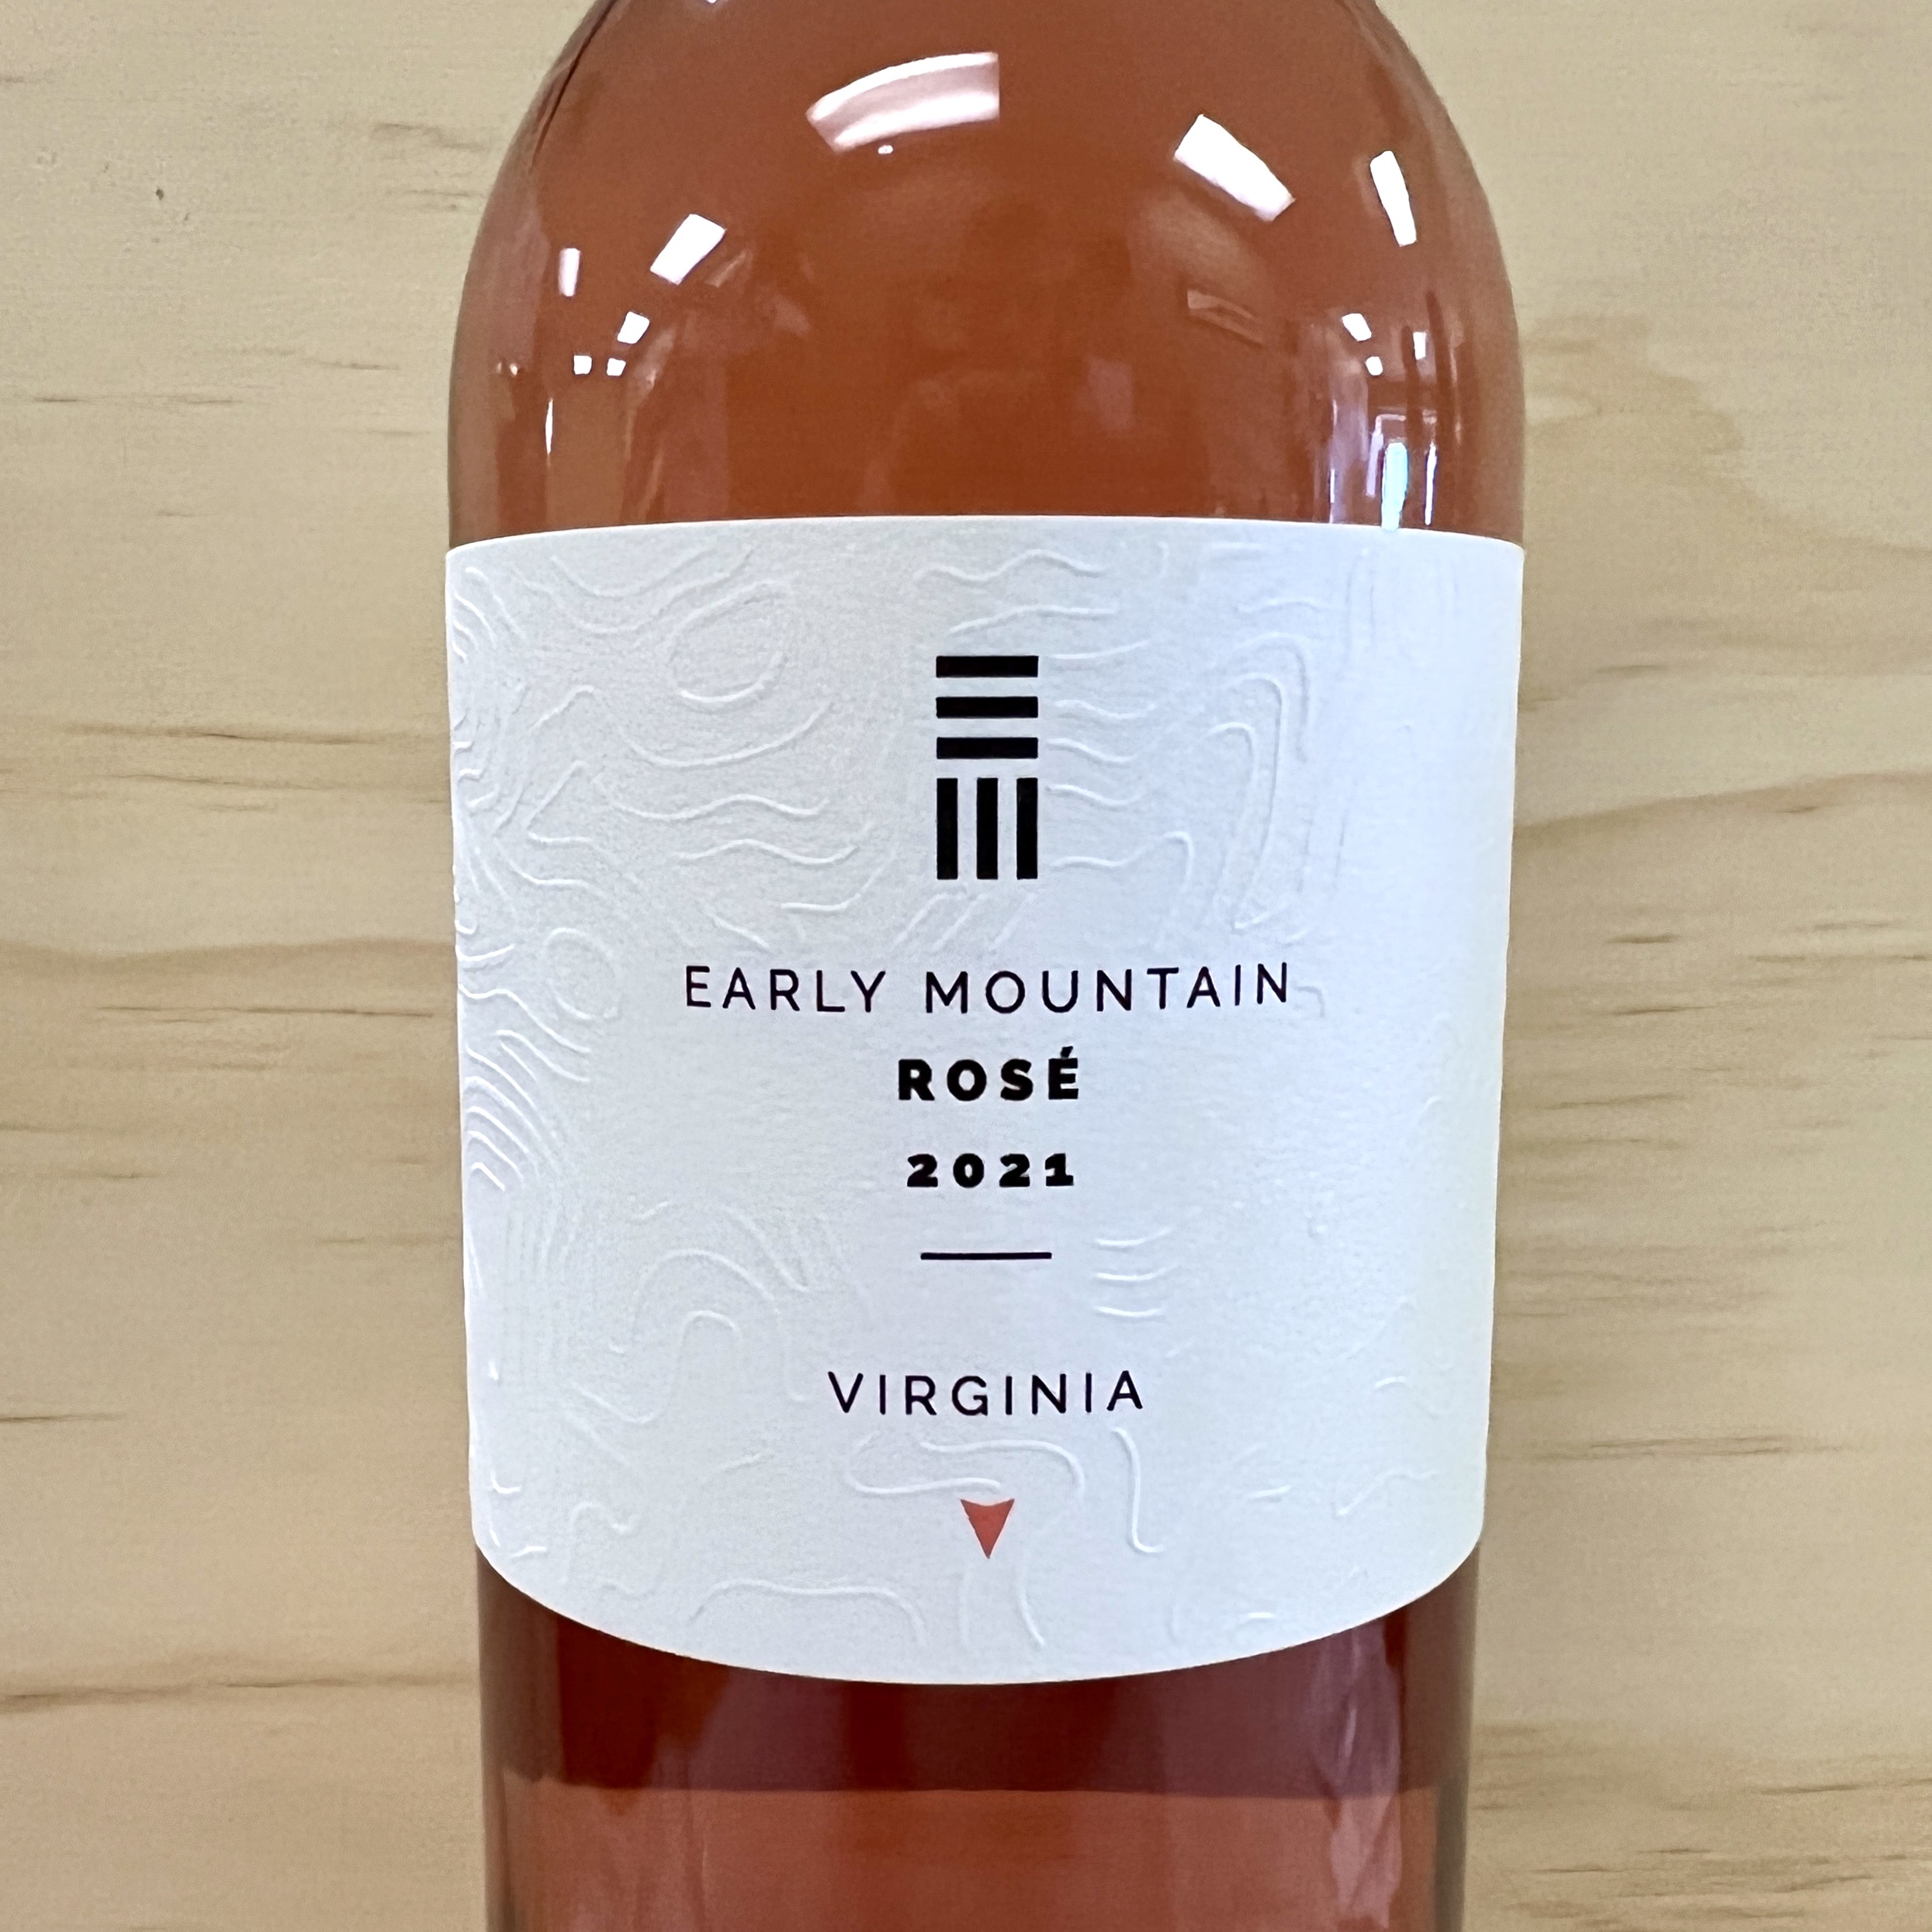 Early Mountain Rose 2021